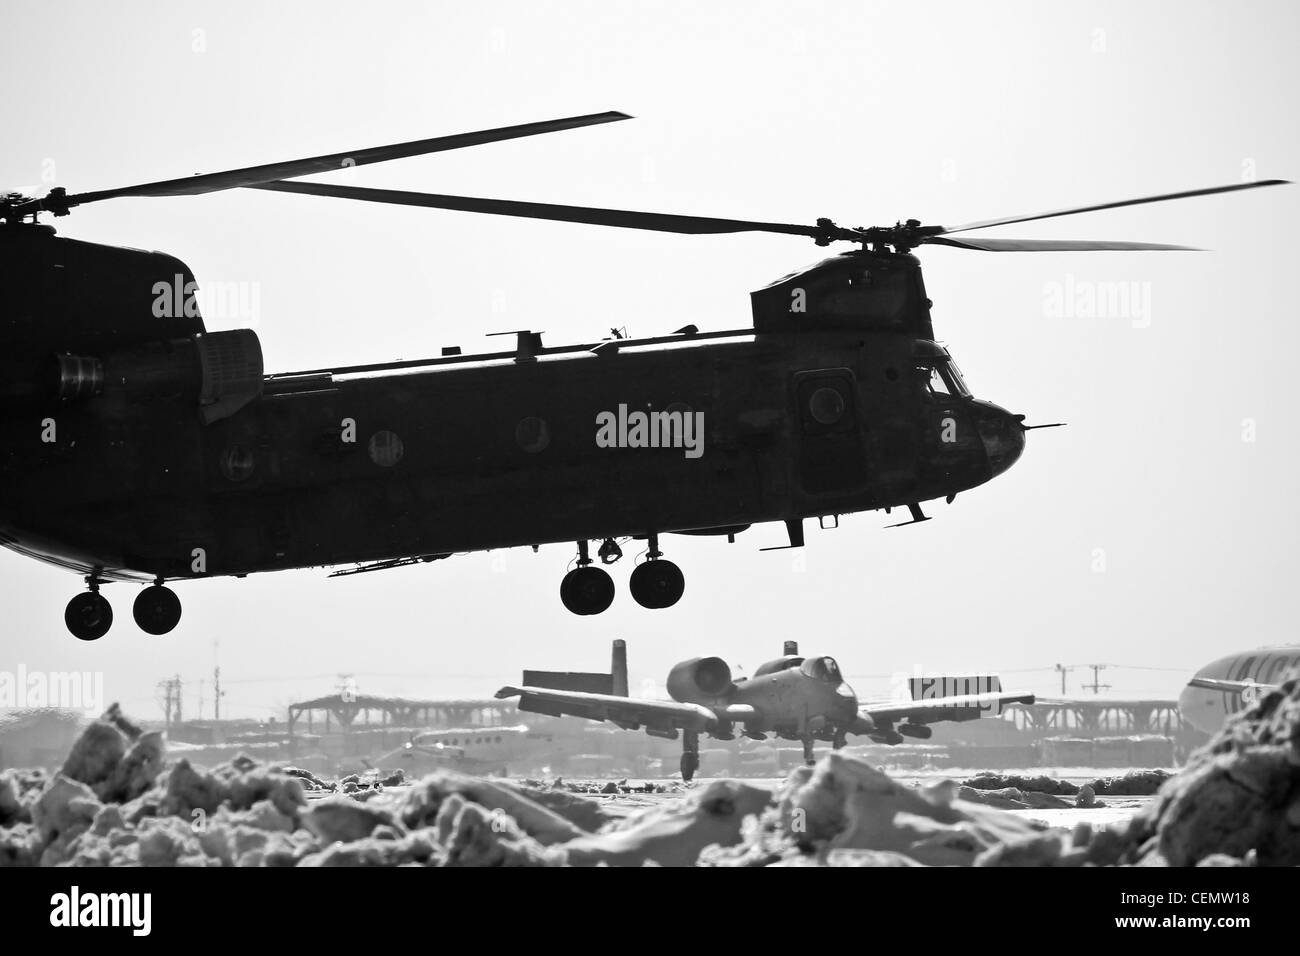 A U.S. Army CH-47 Chinook heavy lift helicopter stands by for takeoff as a U.S. Air Force A-10C Thunderbolt II lands at Bagram Air Field, Afghanistan, on Feb 16, 2012. Stock Photo